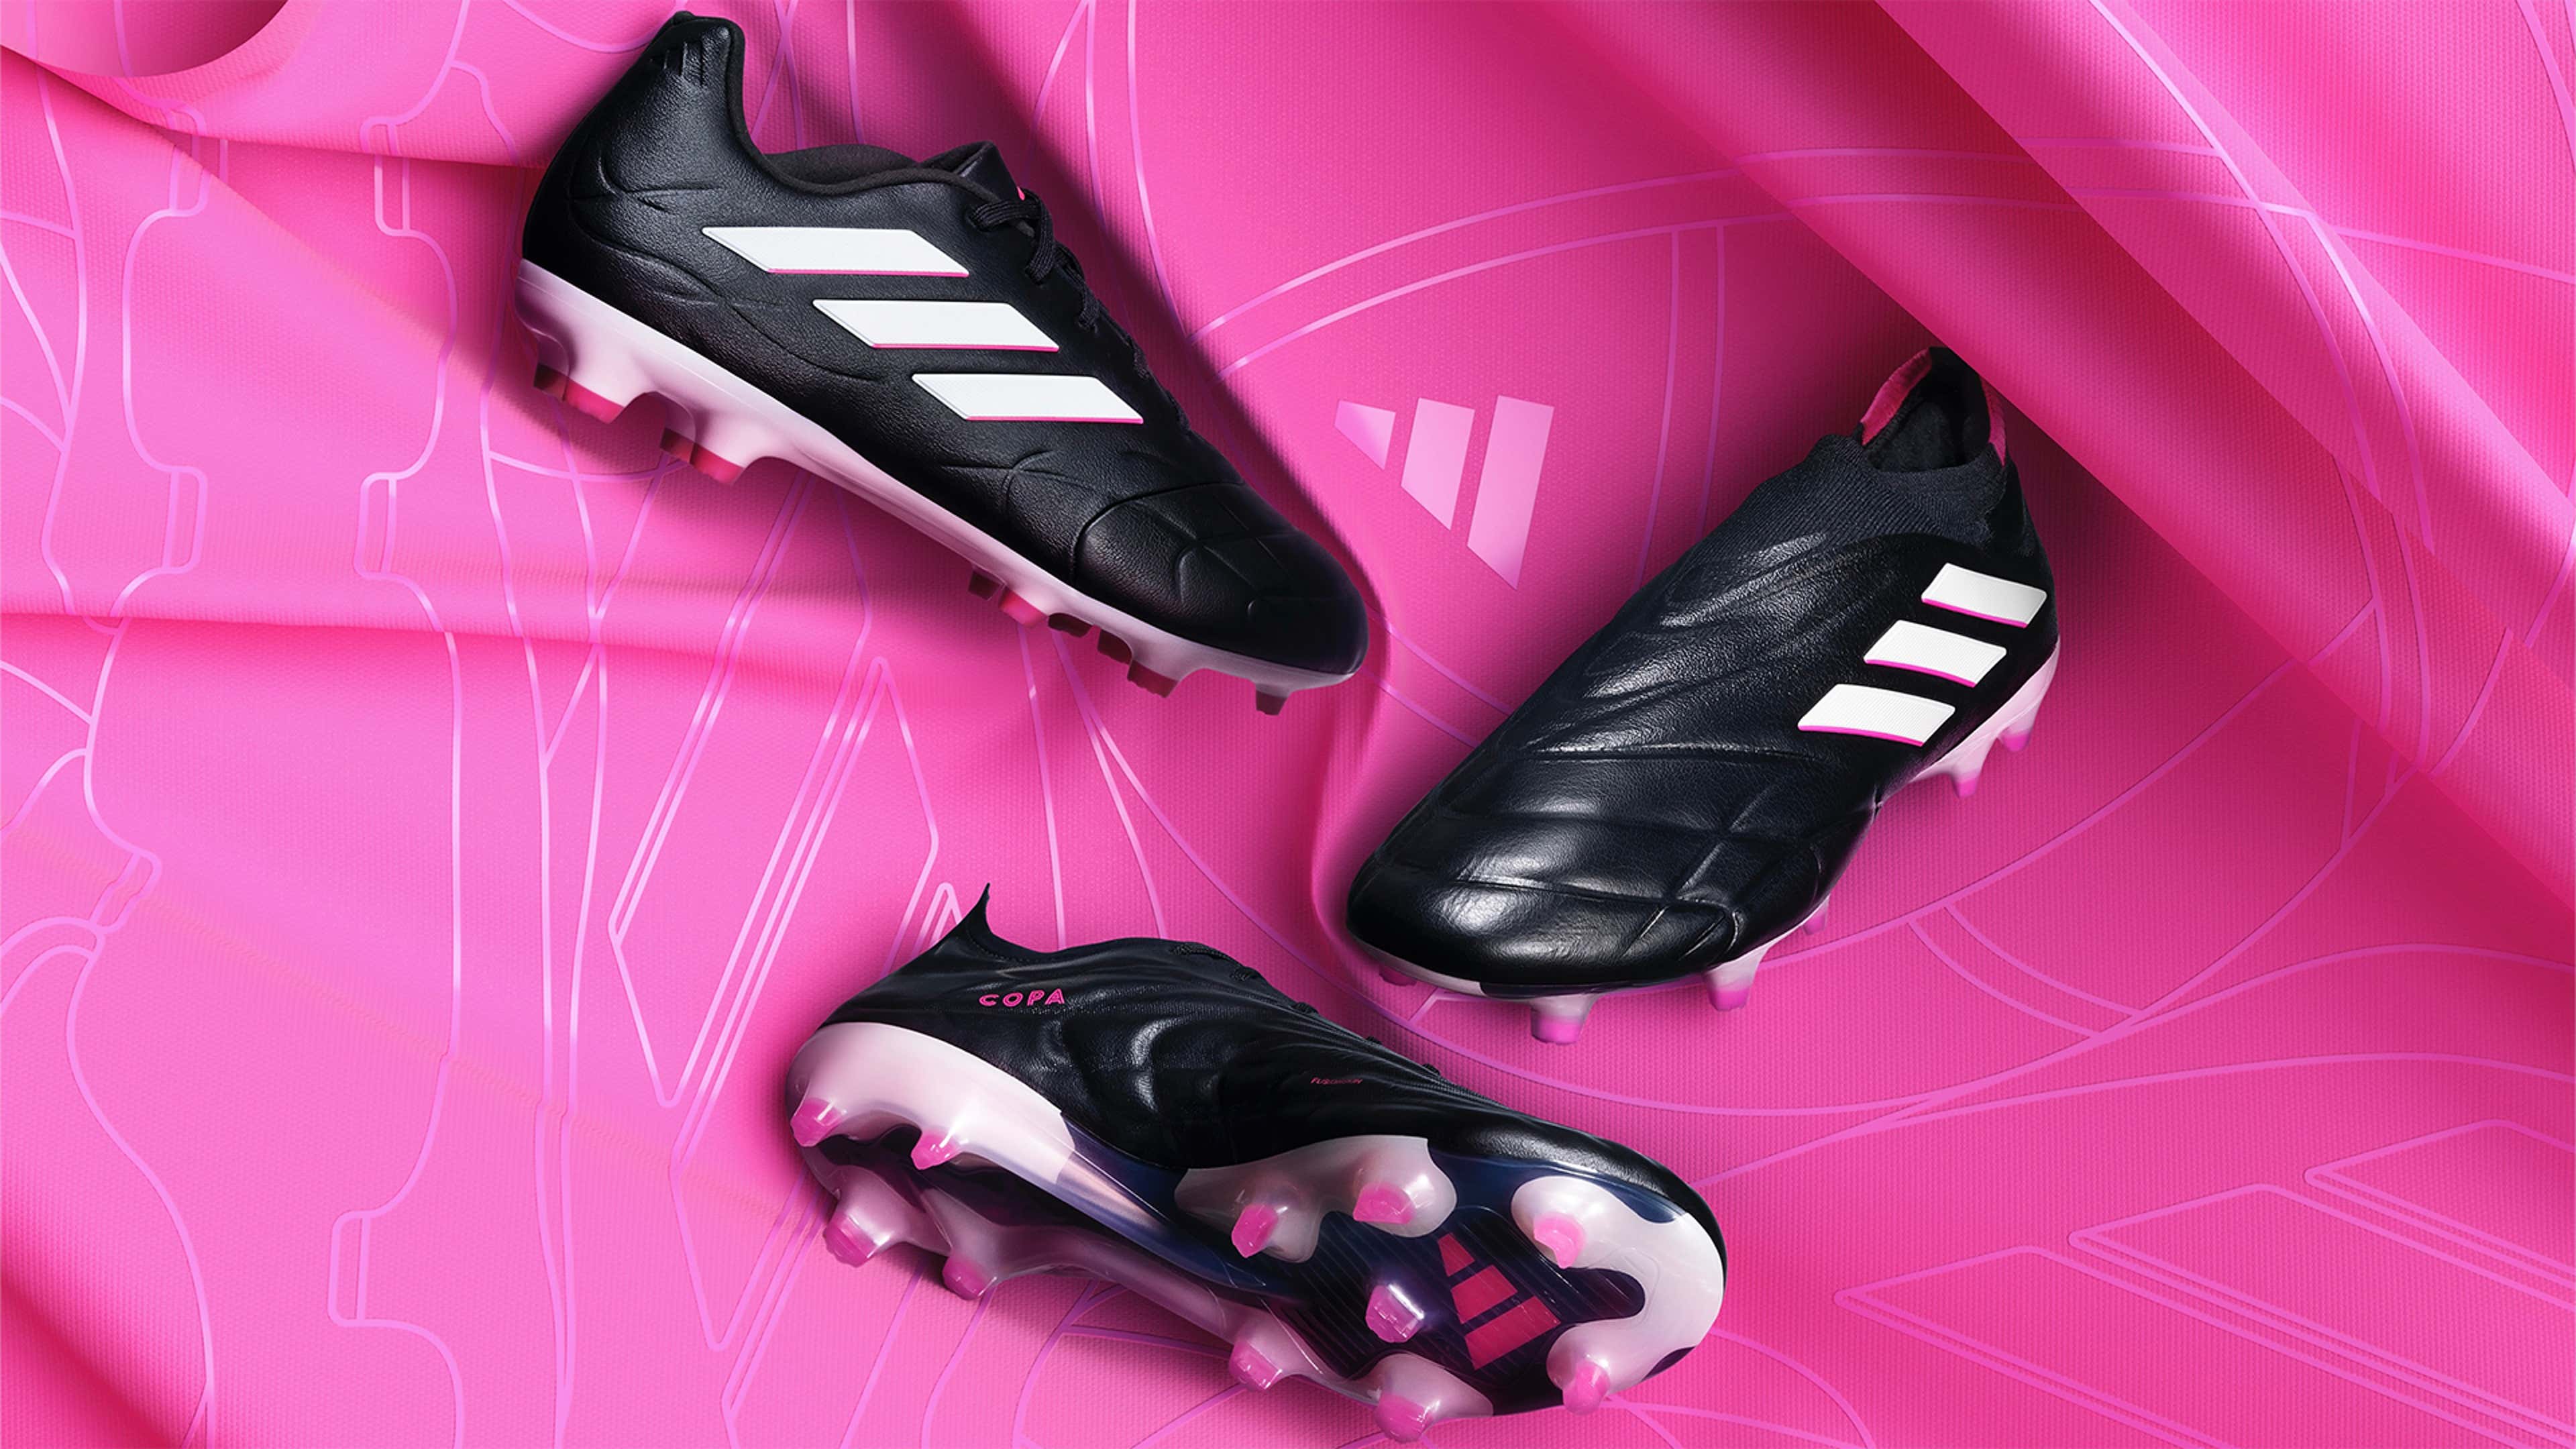 medeleerling Billy Goat voor eeuwig adidas expands the COPA line with three new COPA Pure colourways | Goal.com